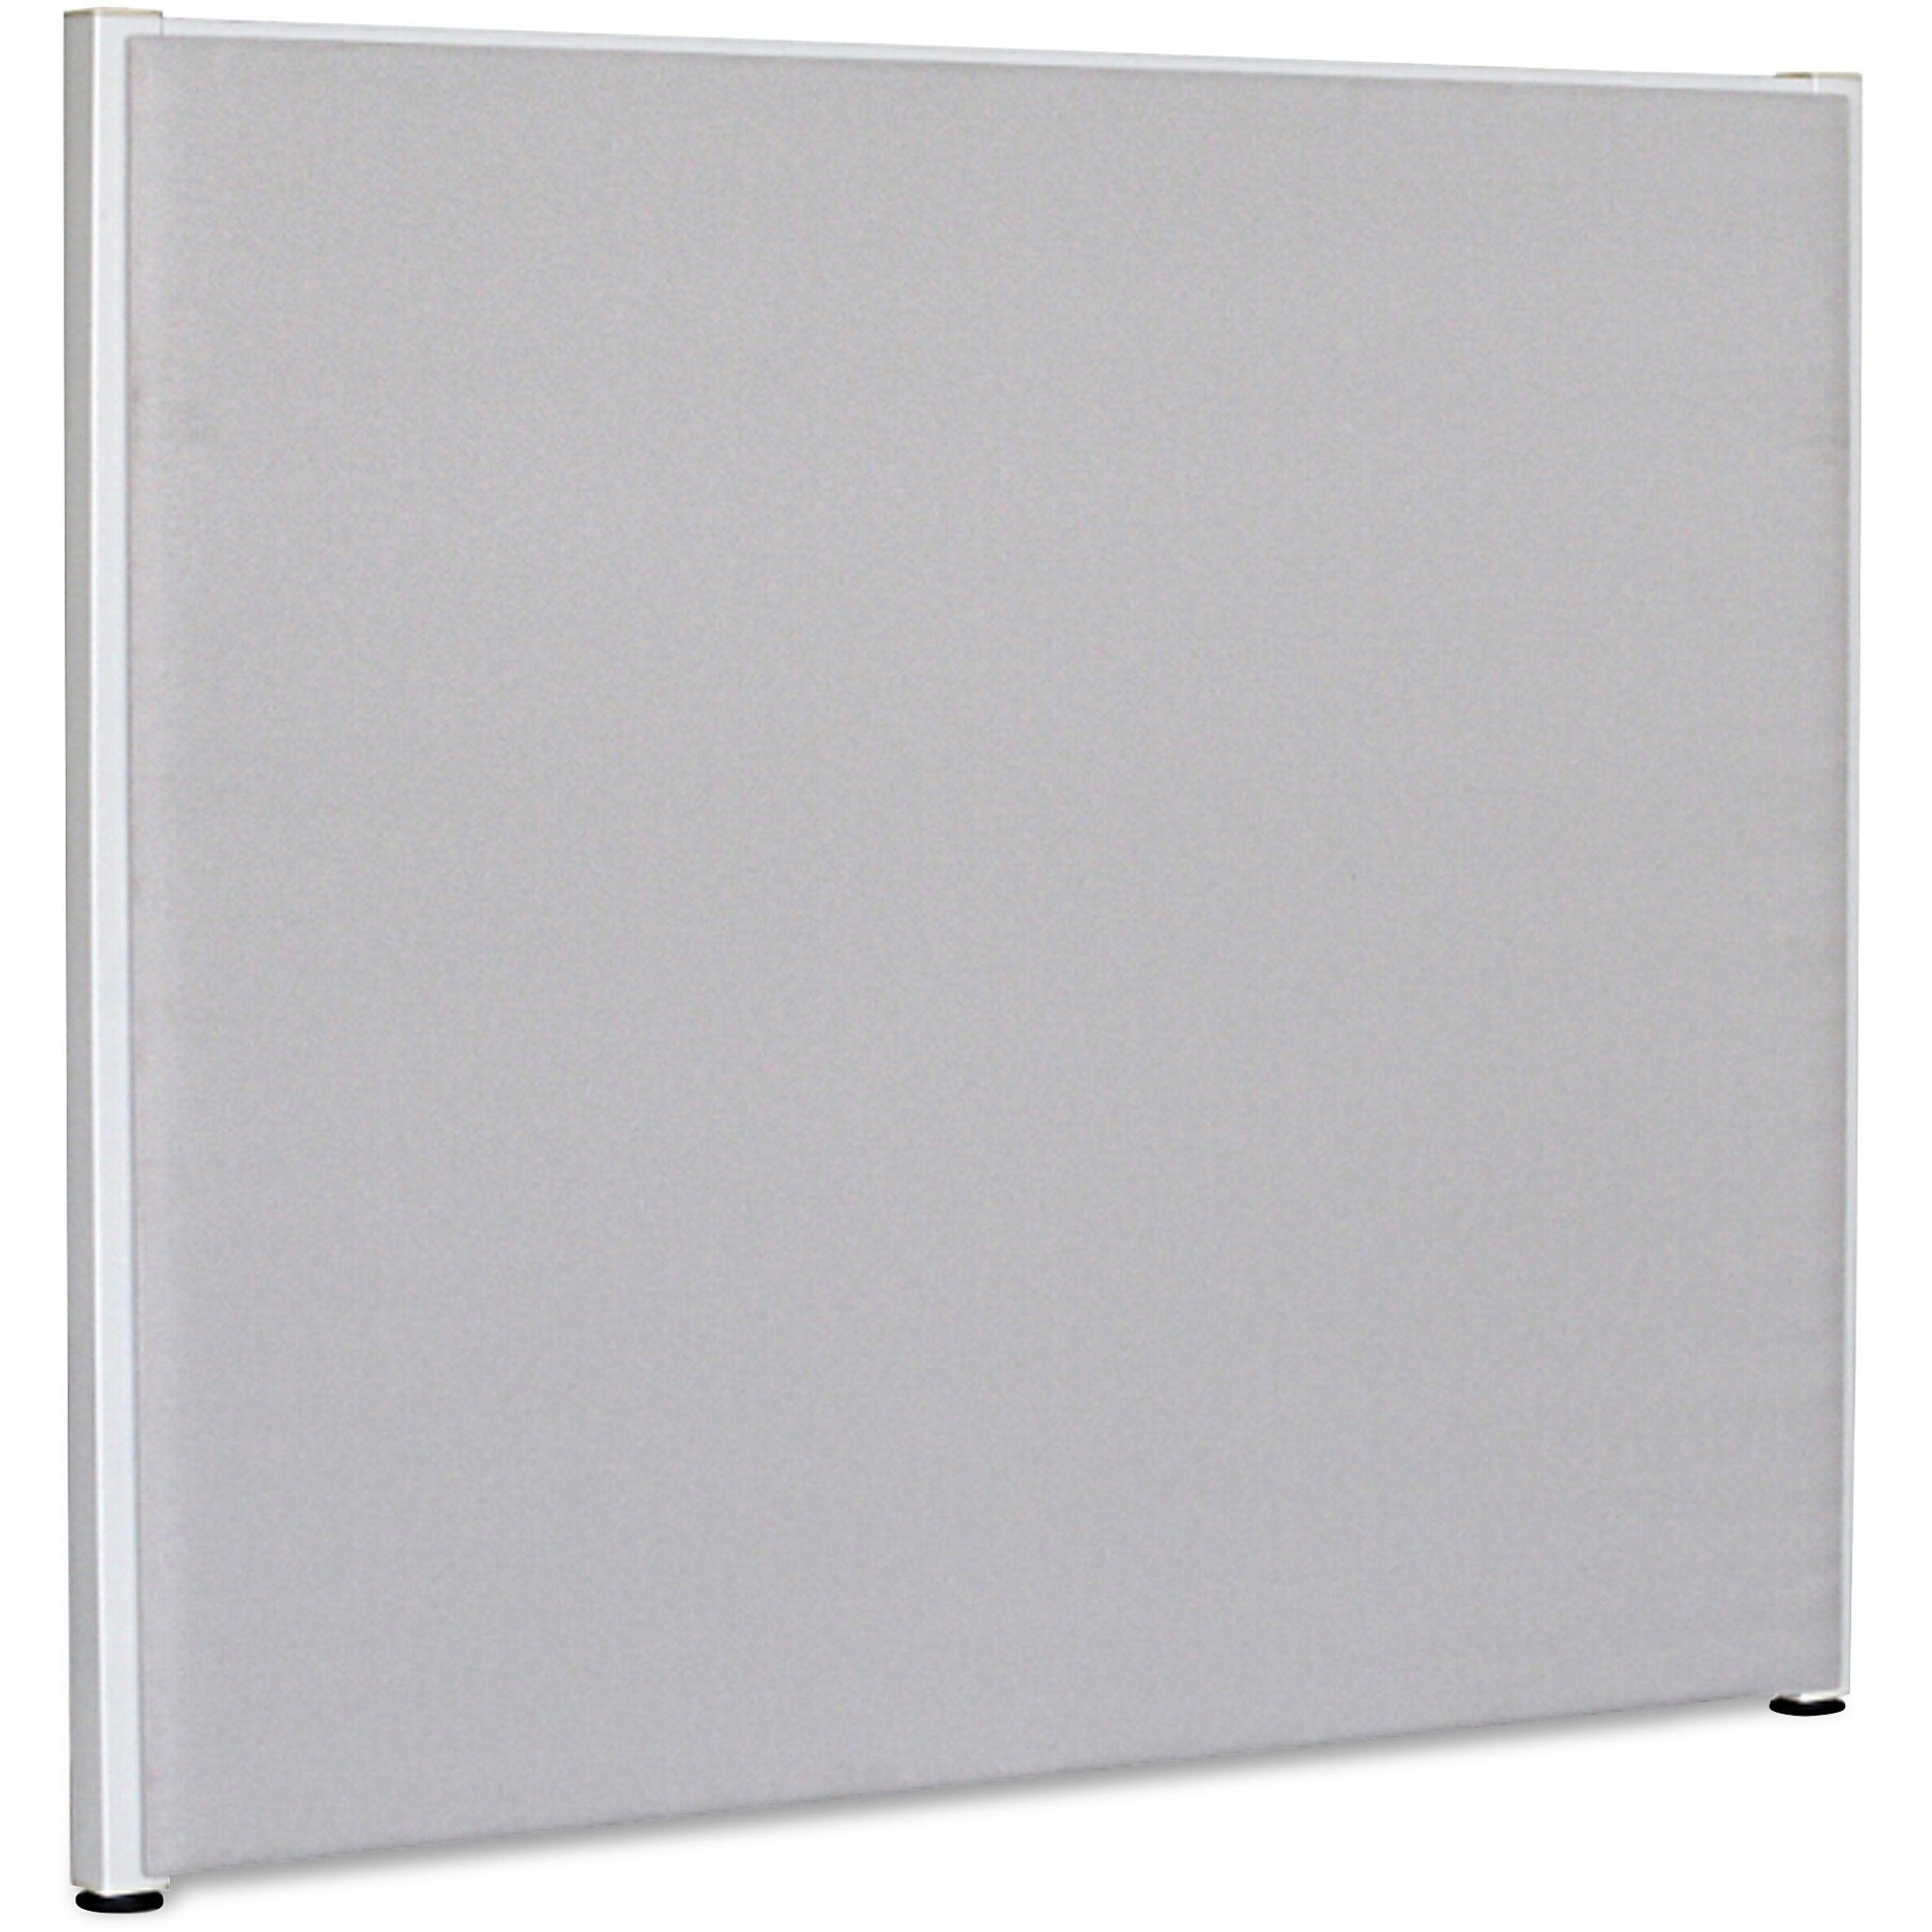 Lorell Panel System Partition Fabric Panel - 72.5" Width x 60" Height - Steel Frame - Gray - 1 Each - 